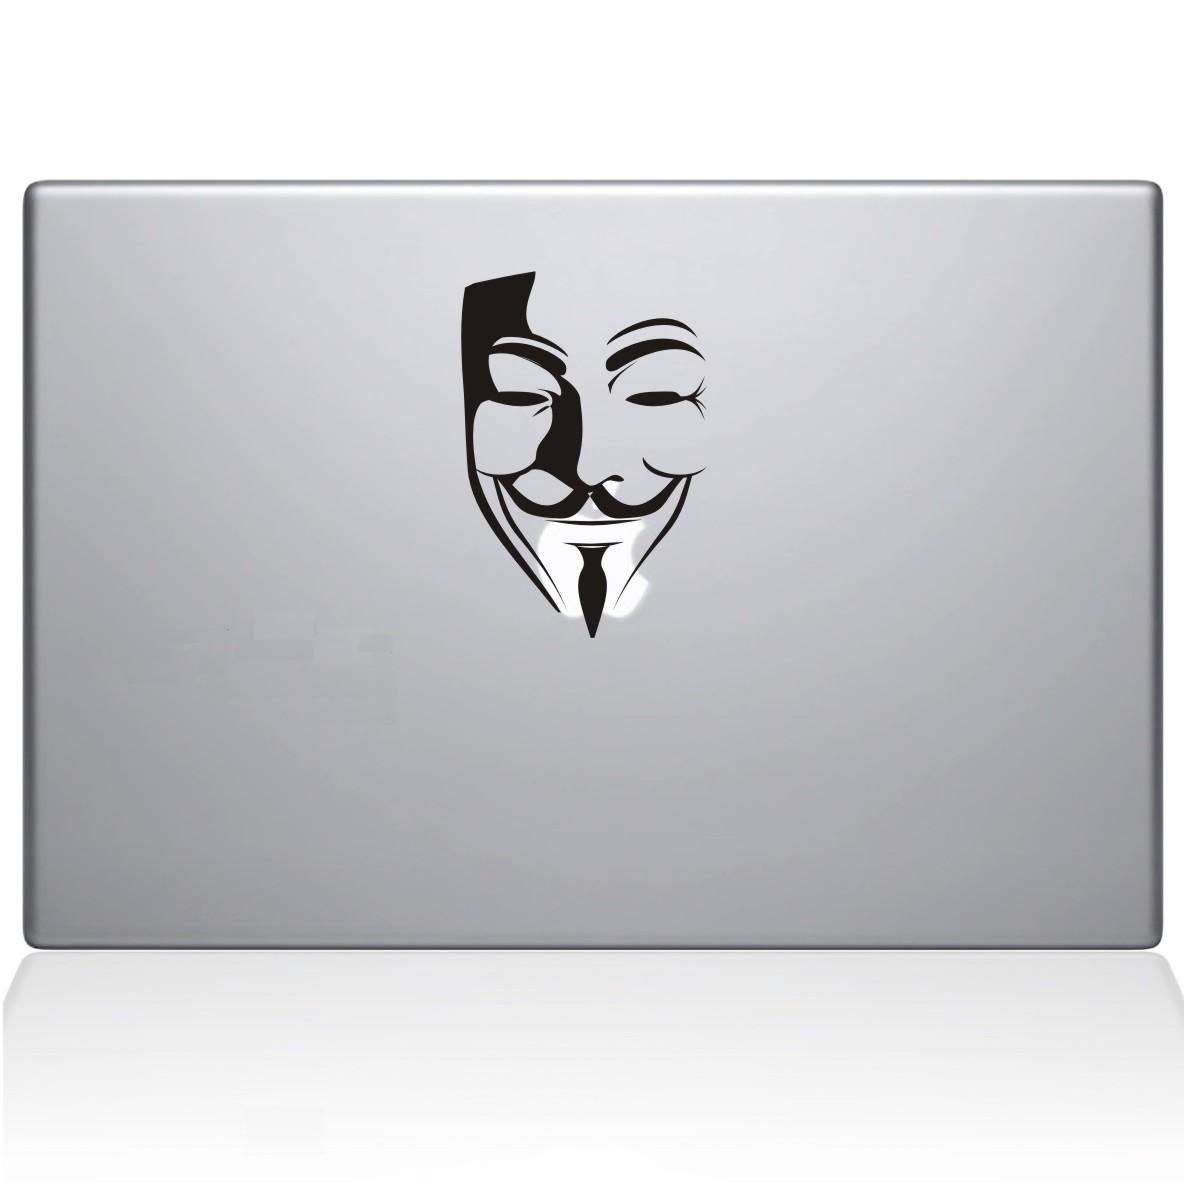 V For Vendetta Mask - Laptop Trackpad Decal Laptop Sticker For Sizes 11 12 13 15 Inch Touchpad Skin Car Wall Vinyl Decal Sticker Home Gym Office Motivational Wall Sticker Decal Quote Fitness Strength Workout Wall Stickers Wall Art For Kids Rooms